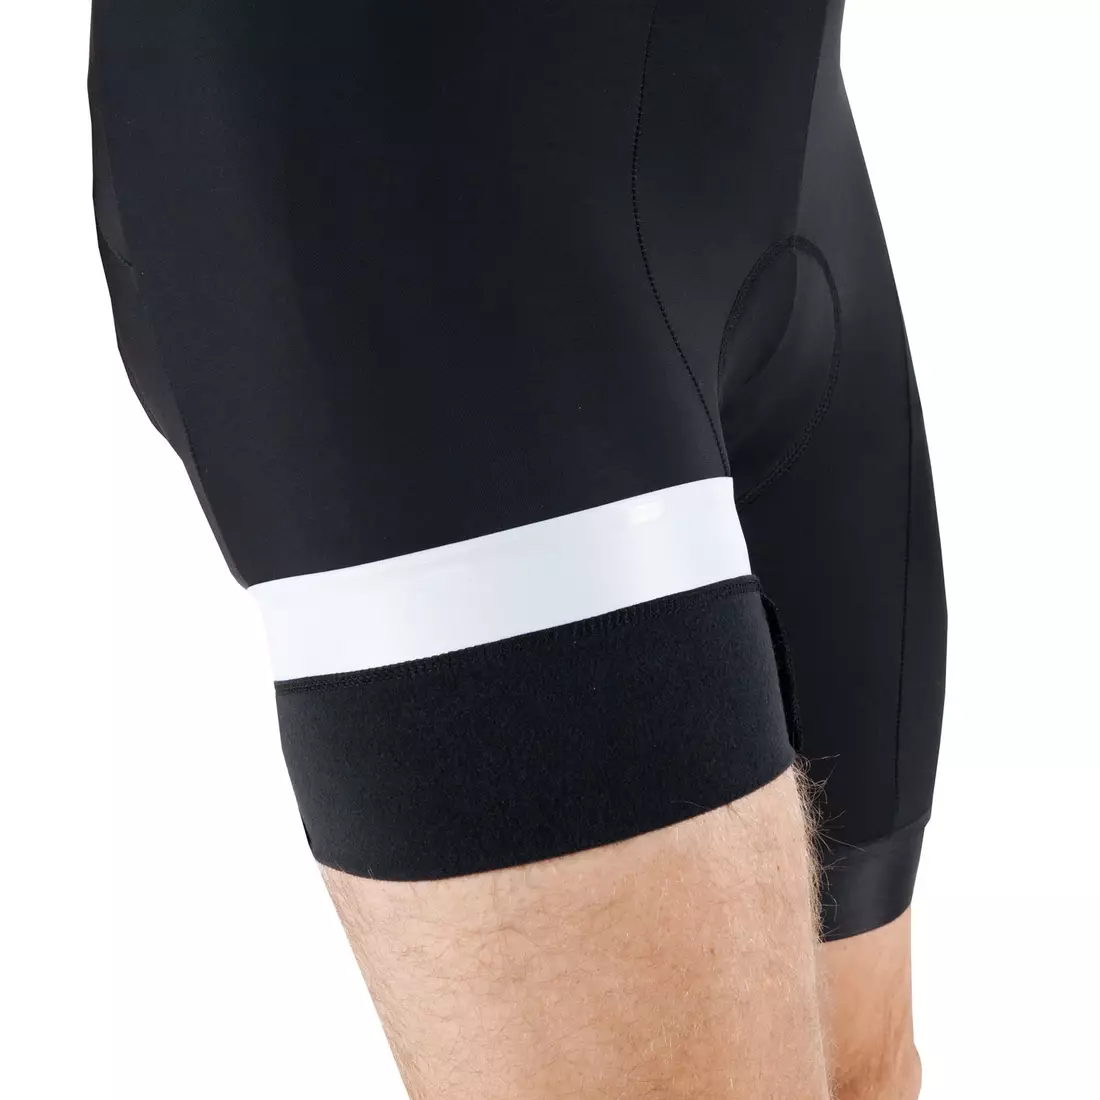 [Set] KAYMAQ DESIGN men's insulated cycling shorts with braces KYBT34, black + DEKO insulated bicycle legs D-ROBAX, black